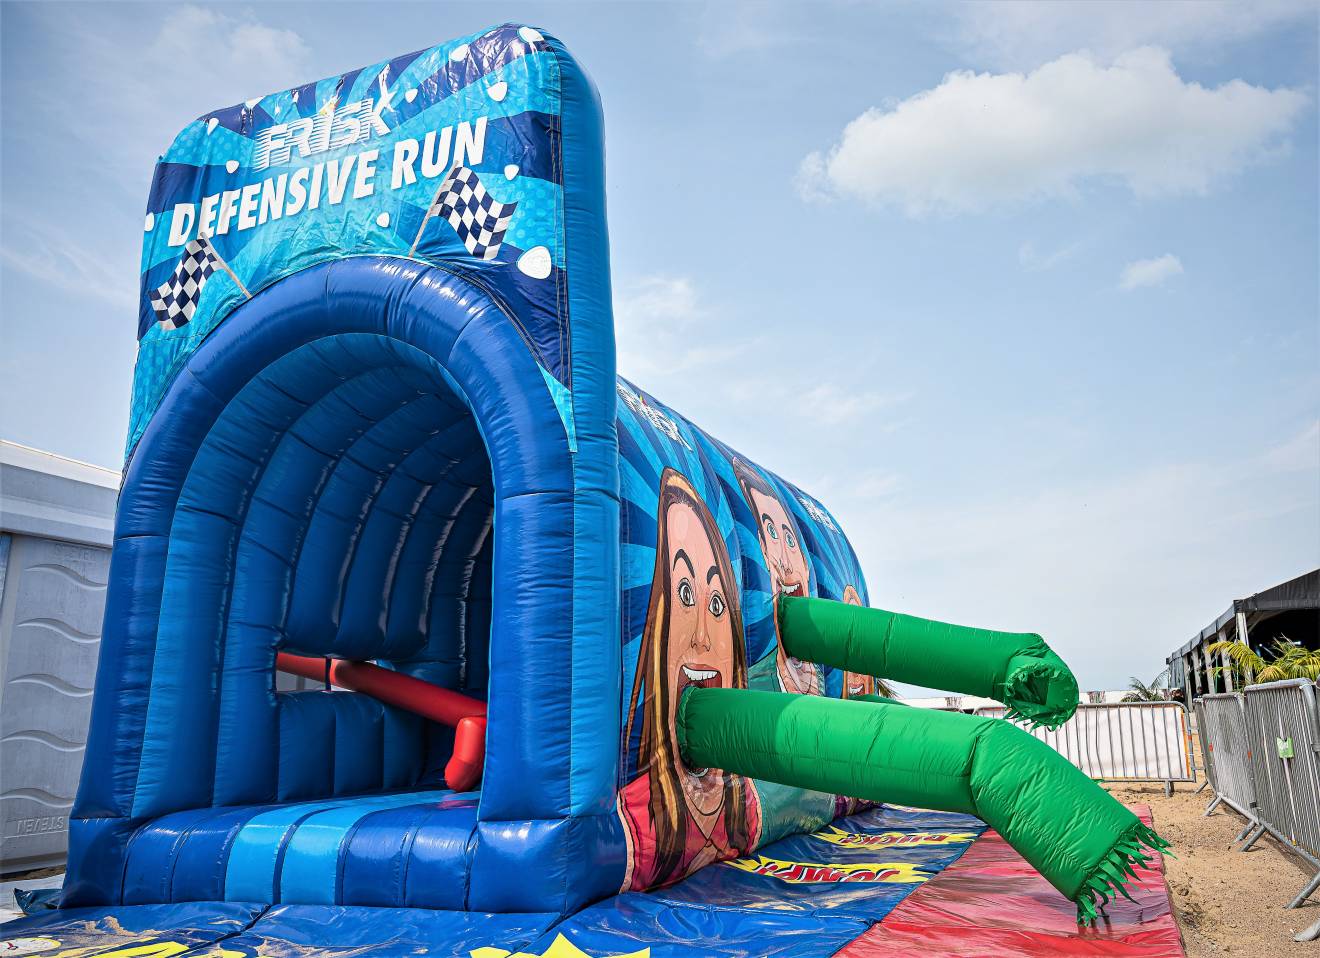 Giant inflatable games tunnel, tailor made, inflatable, game, Frisk Defensive Tunnel, brand activation, dynamic tubesdynamic Ostend Beach Festival X-Treme Creations